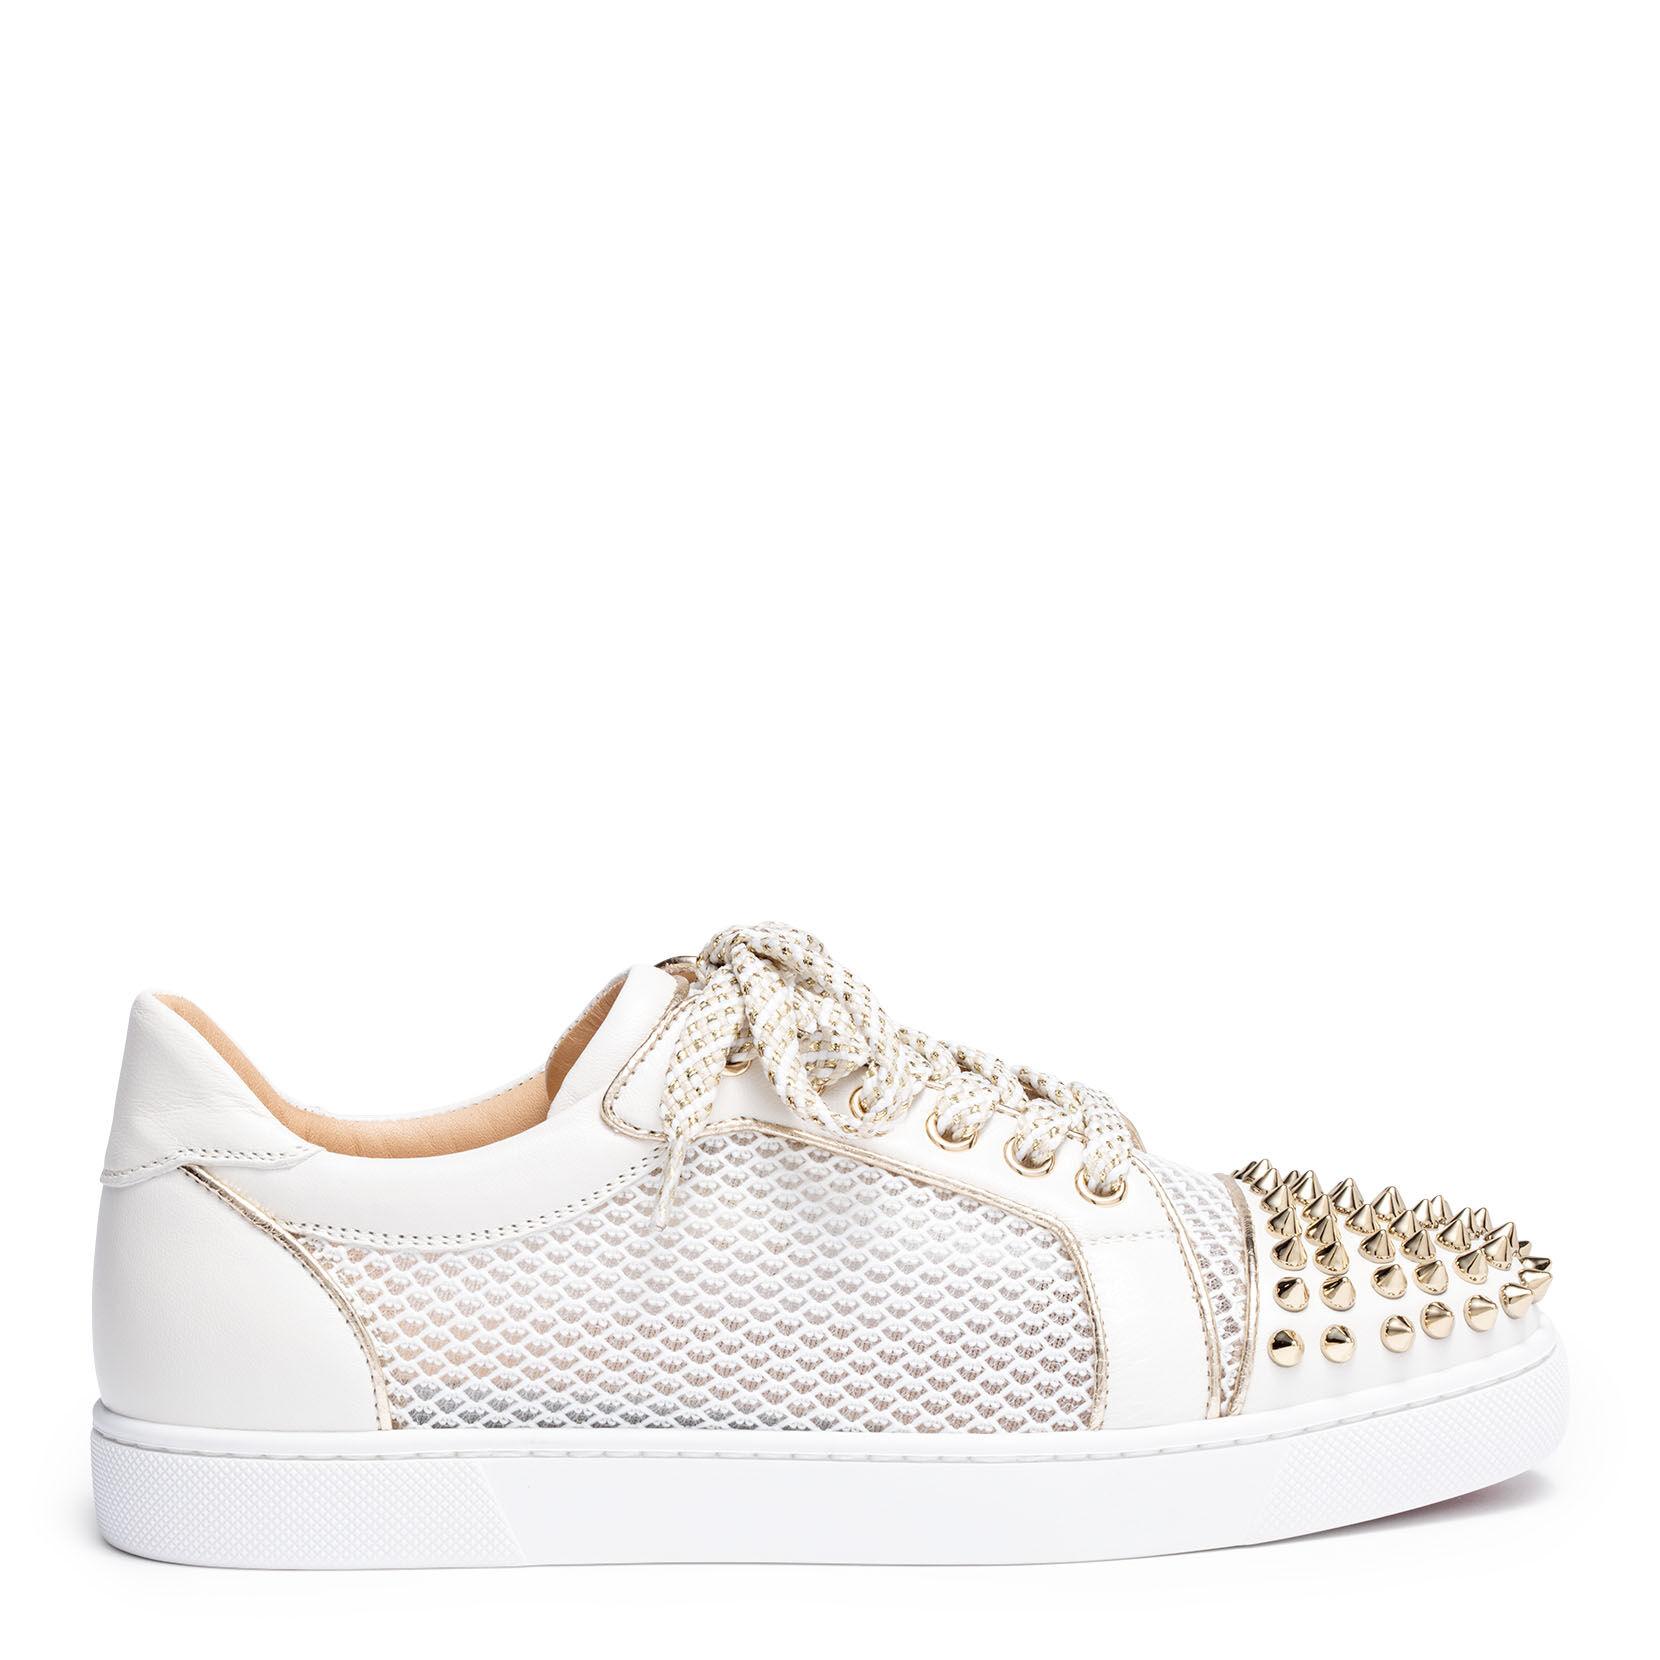 Christian Louboutin Vieira Light Gold Leather Spike Sneakers in ...